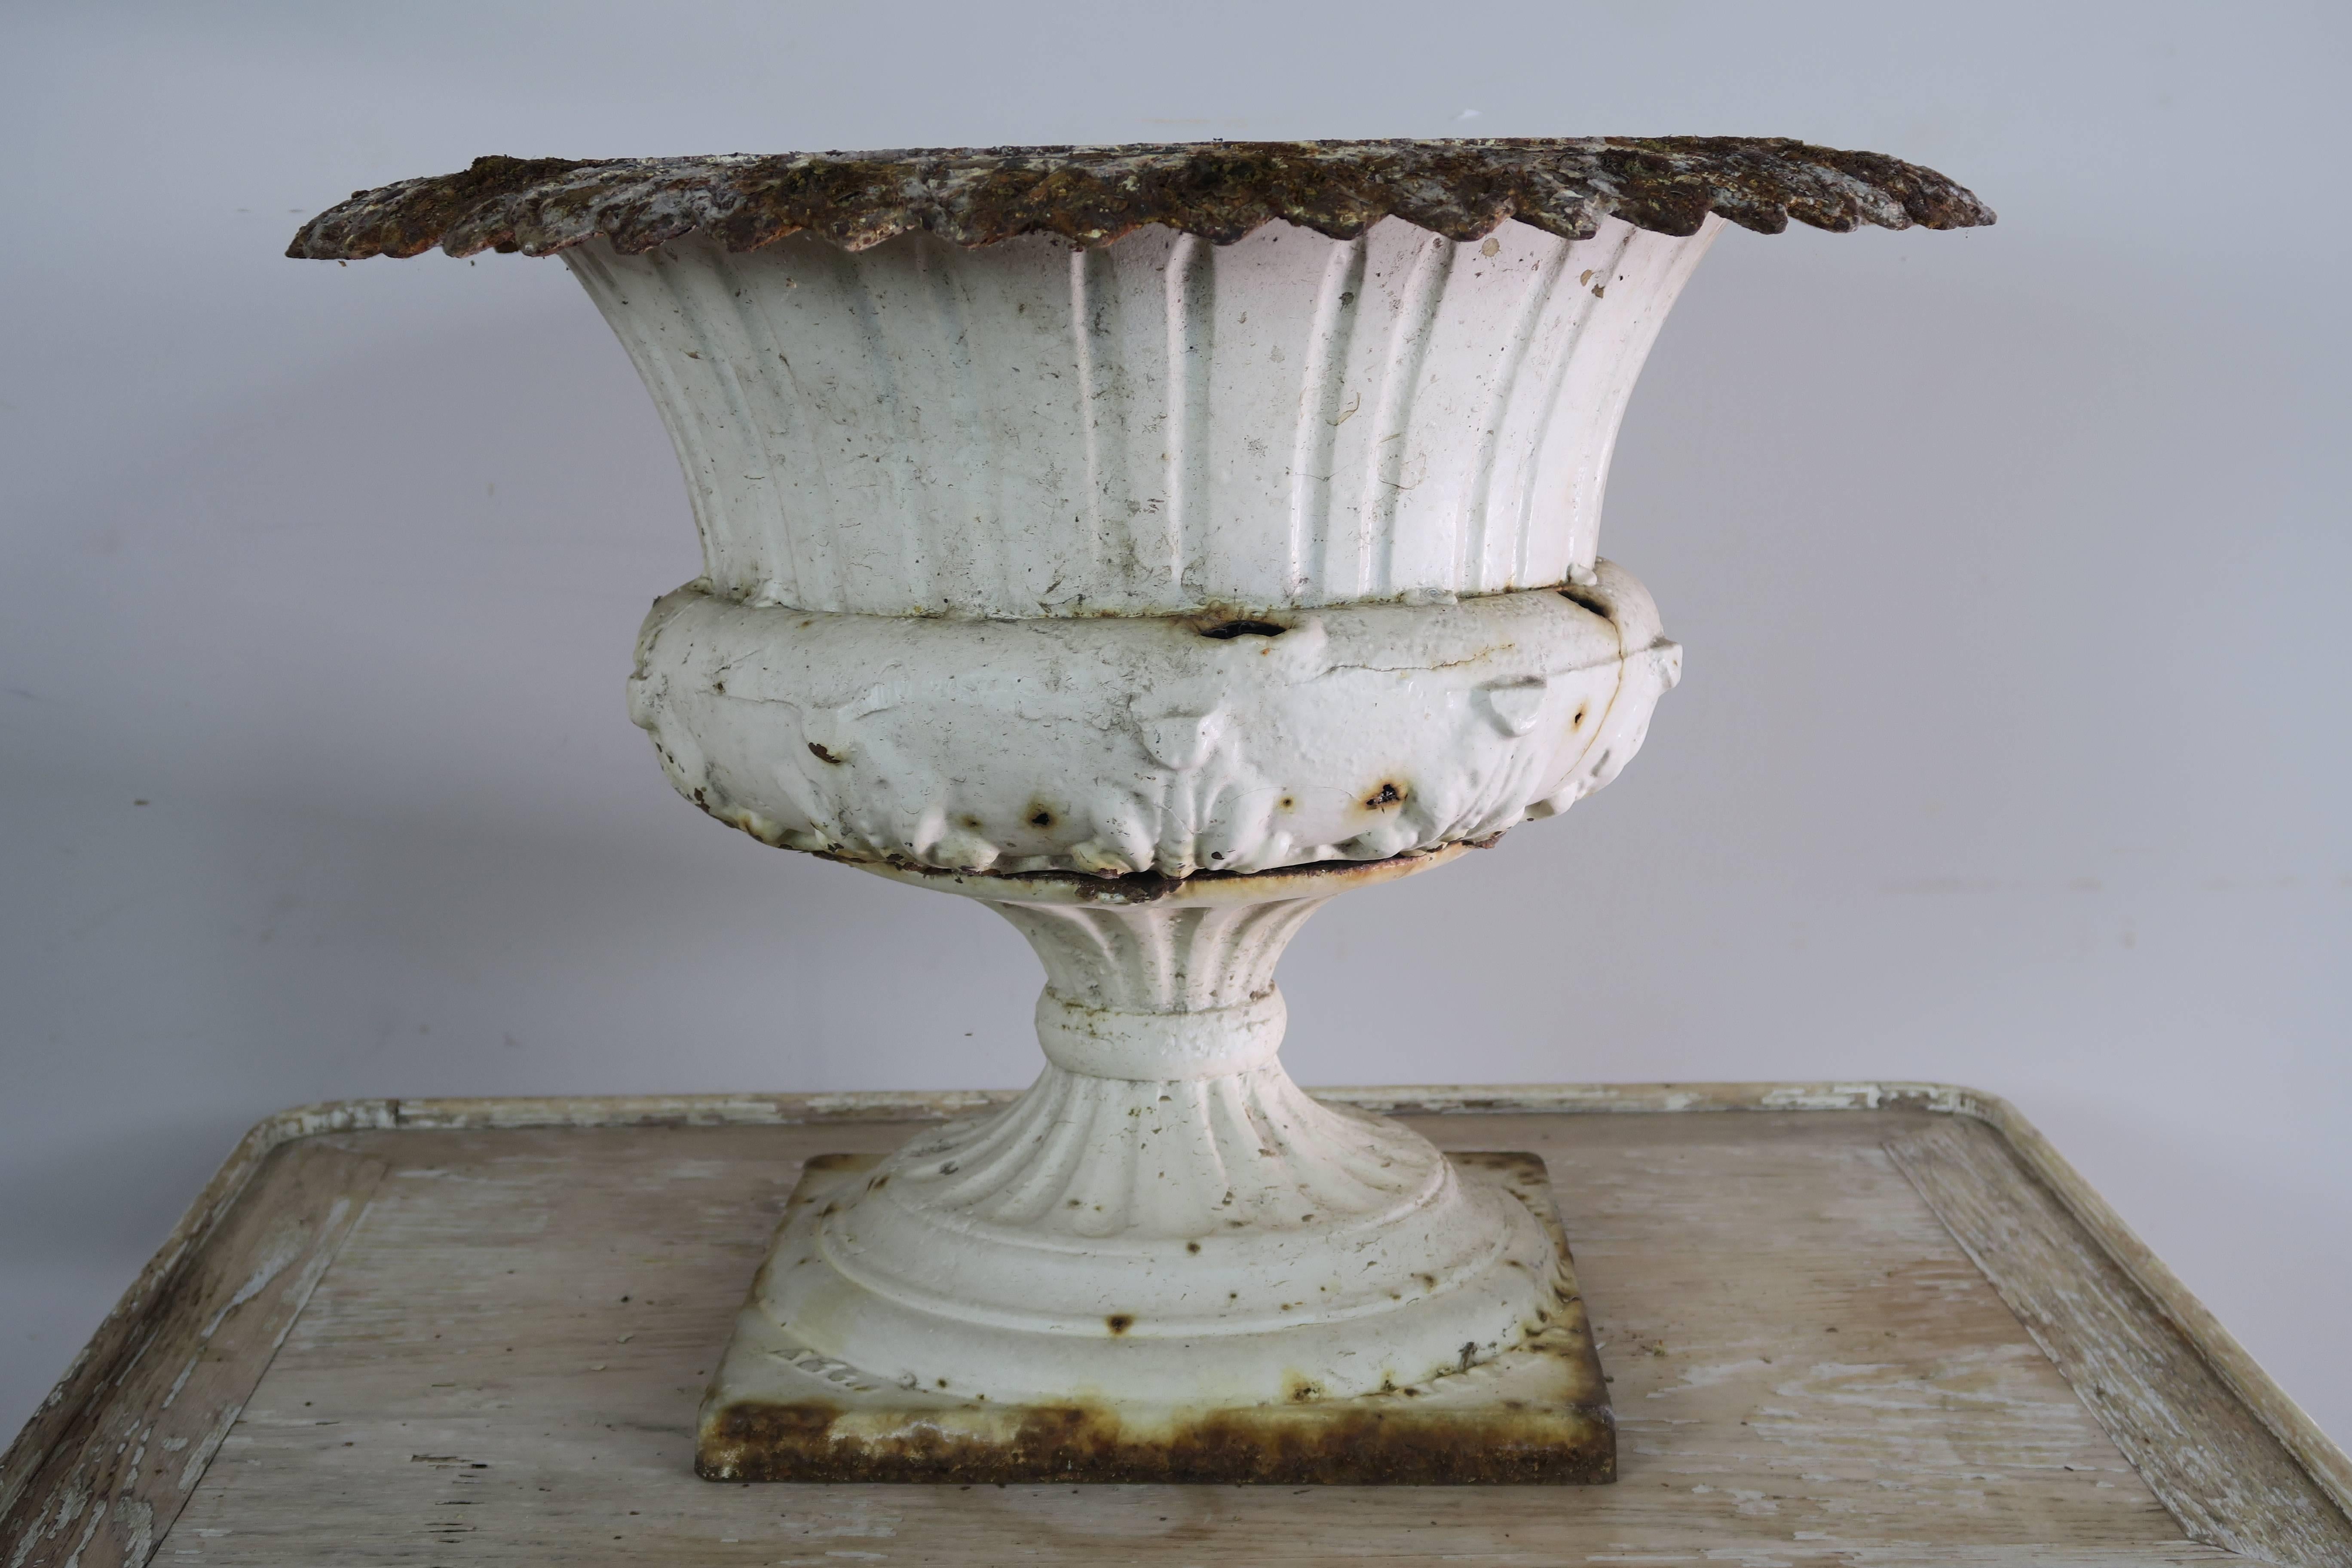 19th century French painted cast iron urn with beautiful scalloped edge detail.